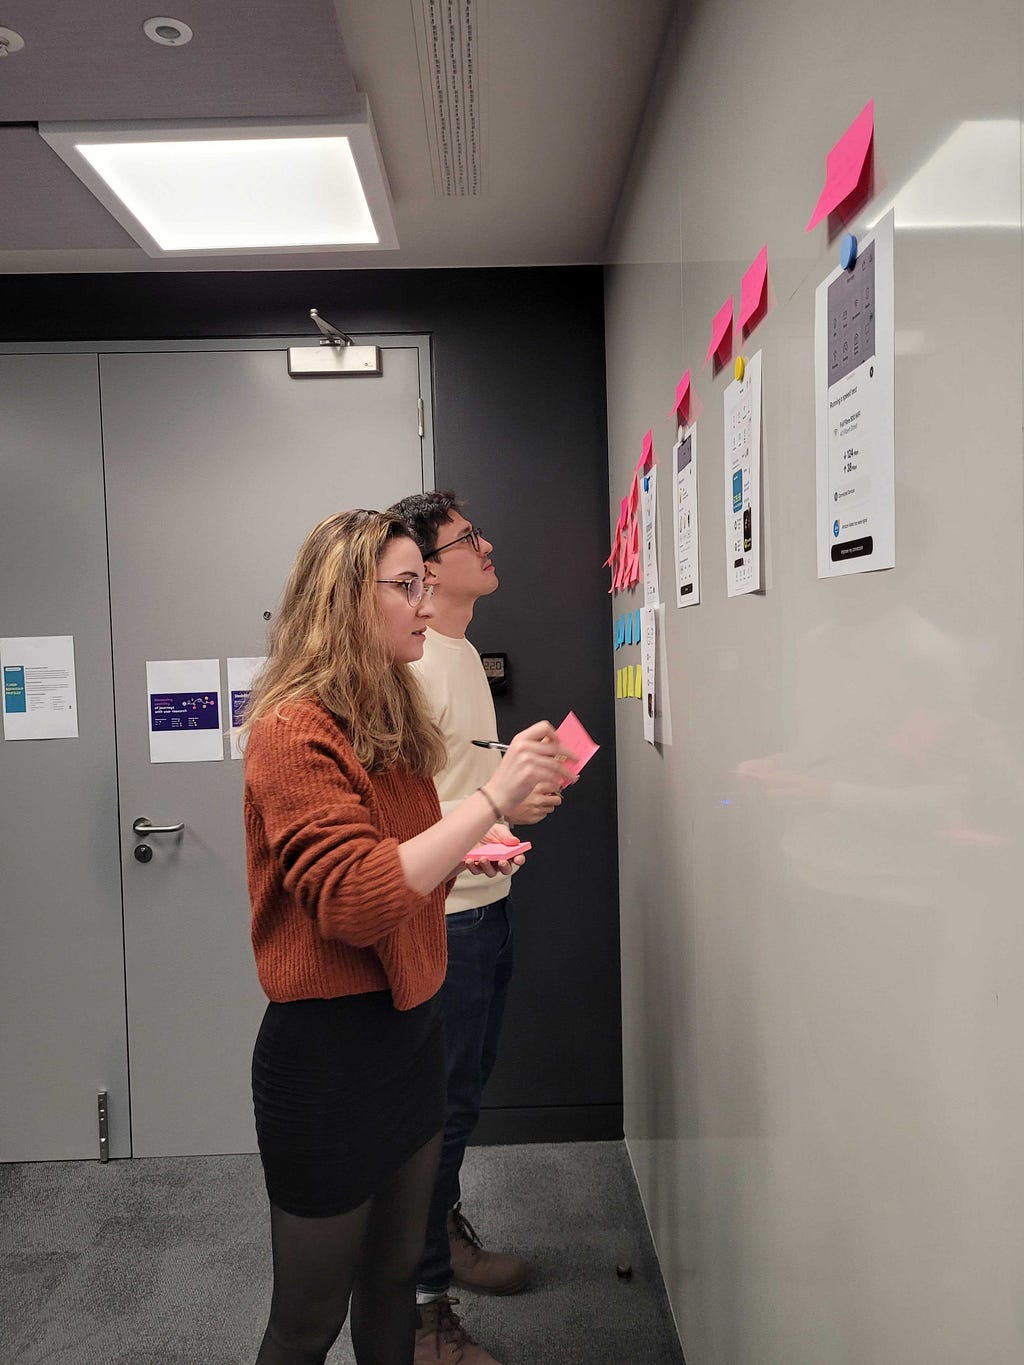 A male and female researcher stand facing a wall of post-its and print-outs of the digital design, making notes with more post-its against each print out of what they are learning.